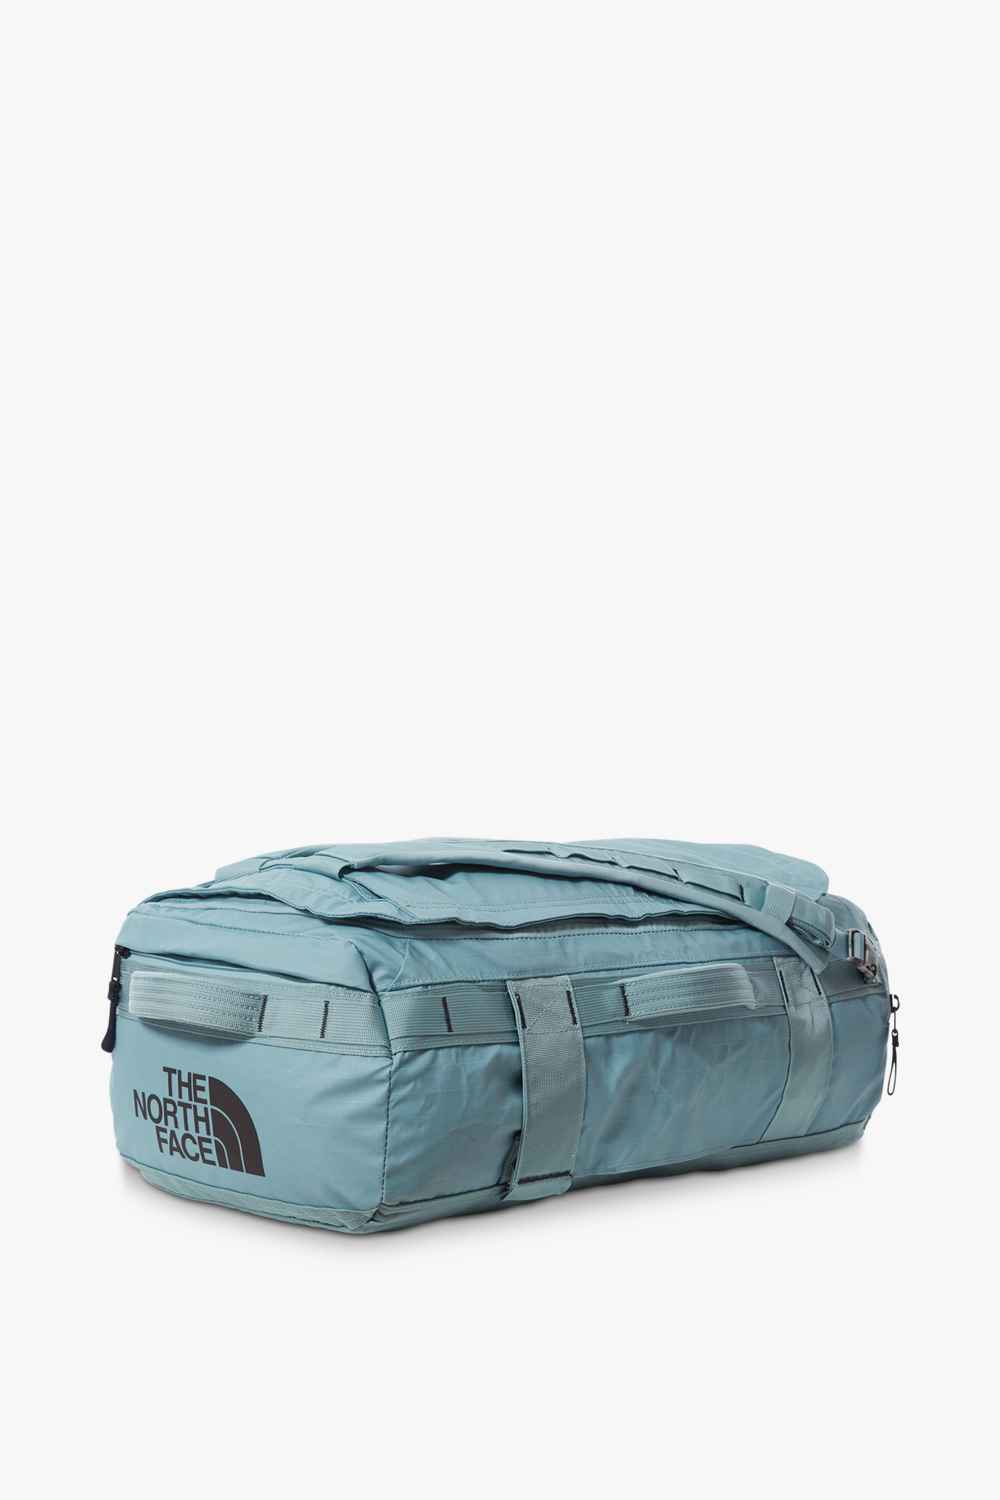 The North Face Base Camp Voyager 32 L Duffel in hellblau kaufen